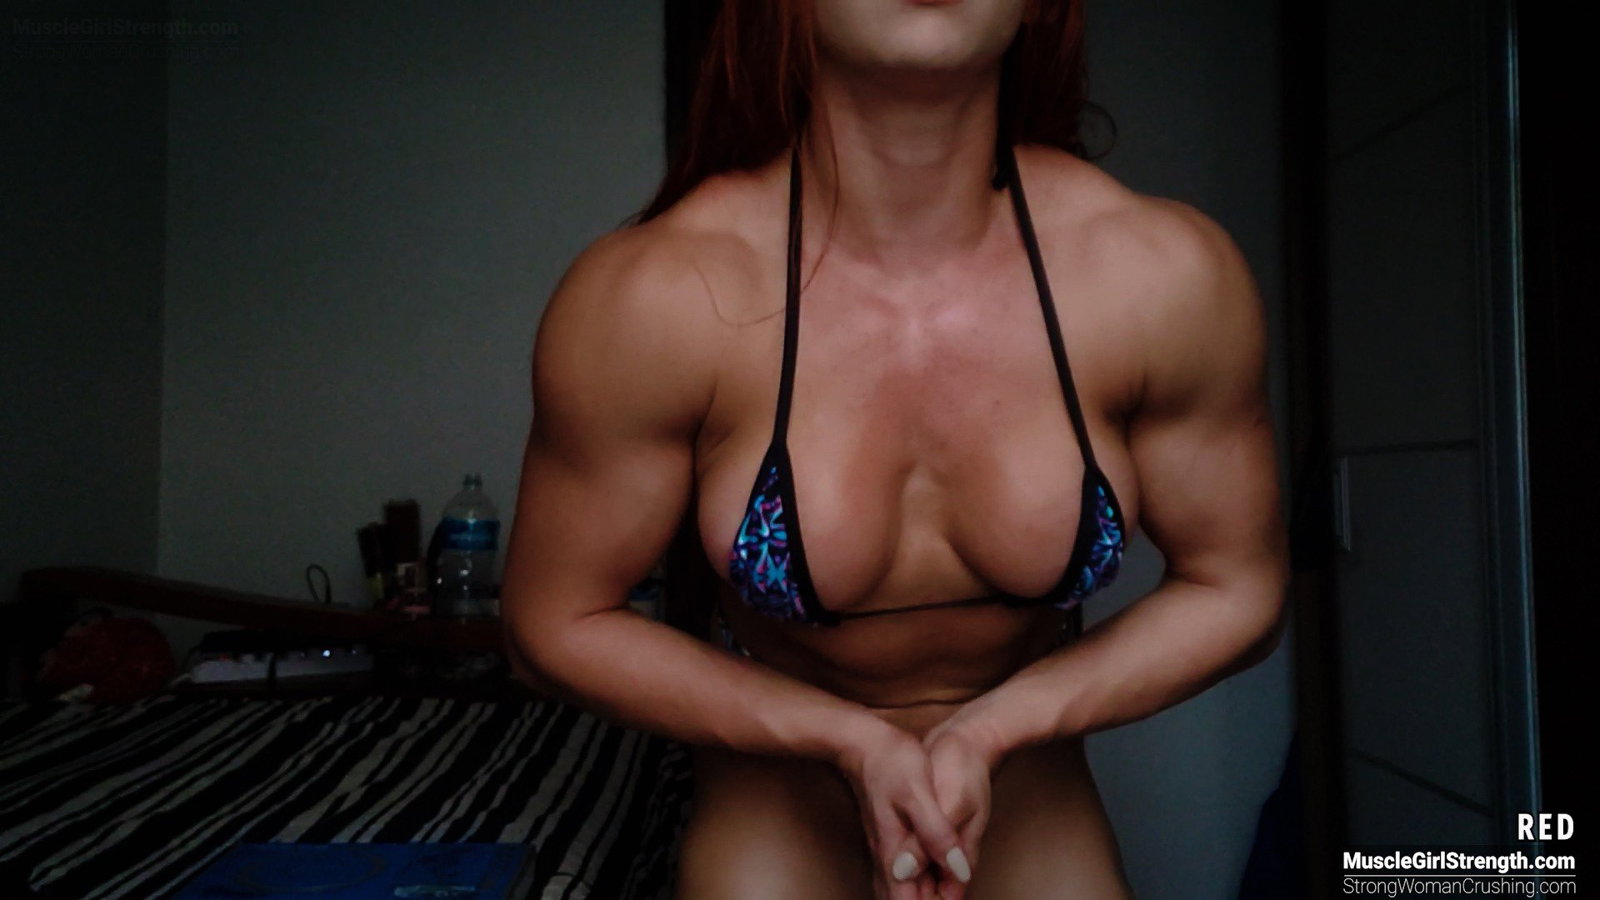 Photo by MusclegirlStrength with the username @MusclegirlStrength, who is a brand user,  May 22, 2023 at 5:12 PM and the text says '💪😍 Link:
https://www.strongwomancrushing.com/2020/11/06/red-obliterates-a-mini-dvd-with-her-might-muscles/

RED obliterates a mini DVD with her might muscles

RED uses her superior strength and muscular body to destroy an old mini DVD player -..'